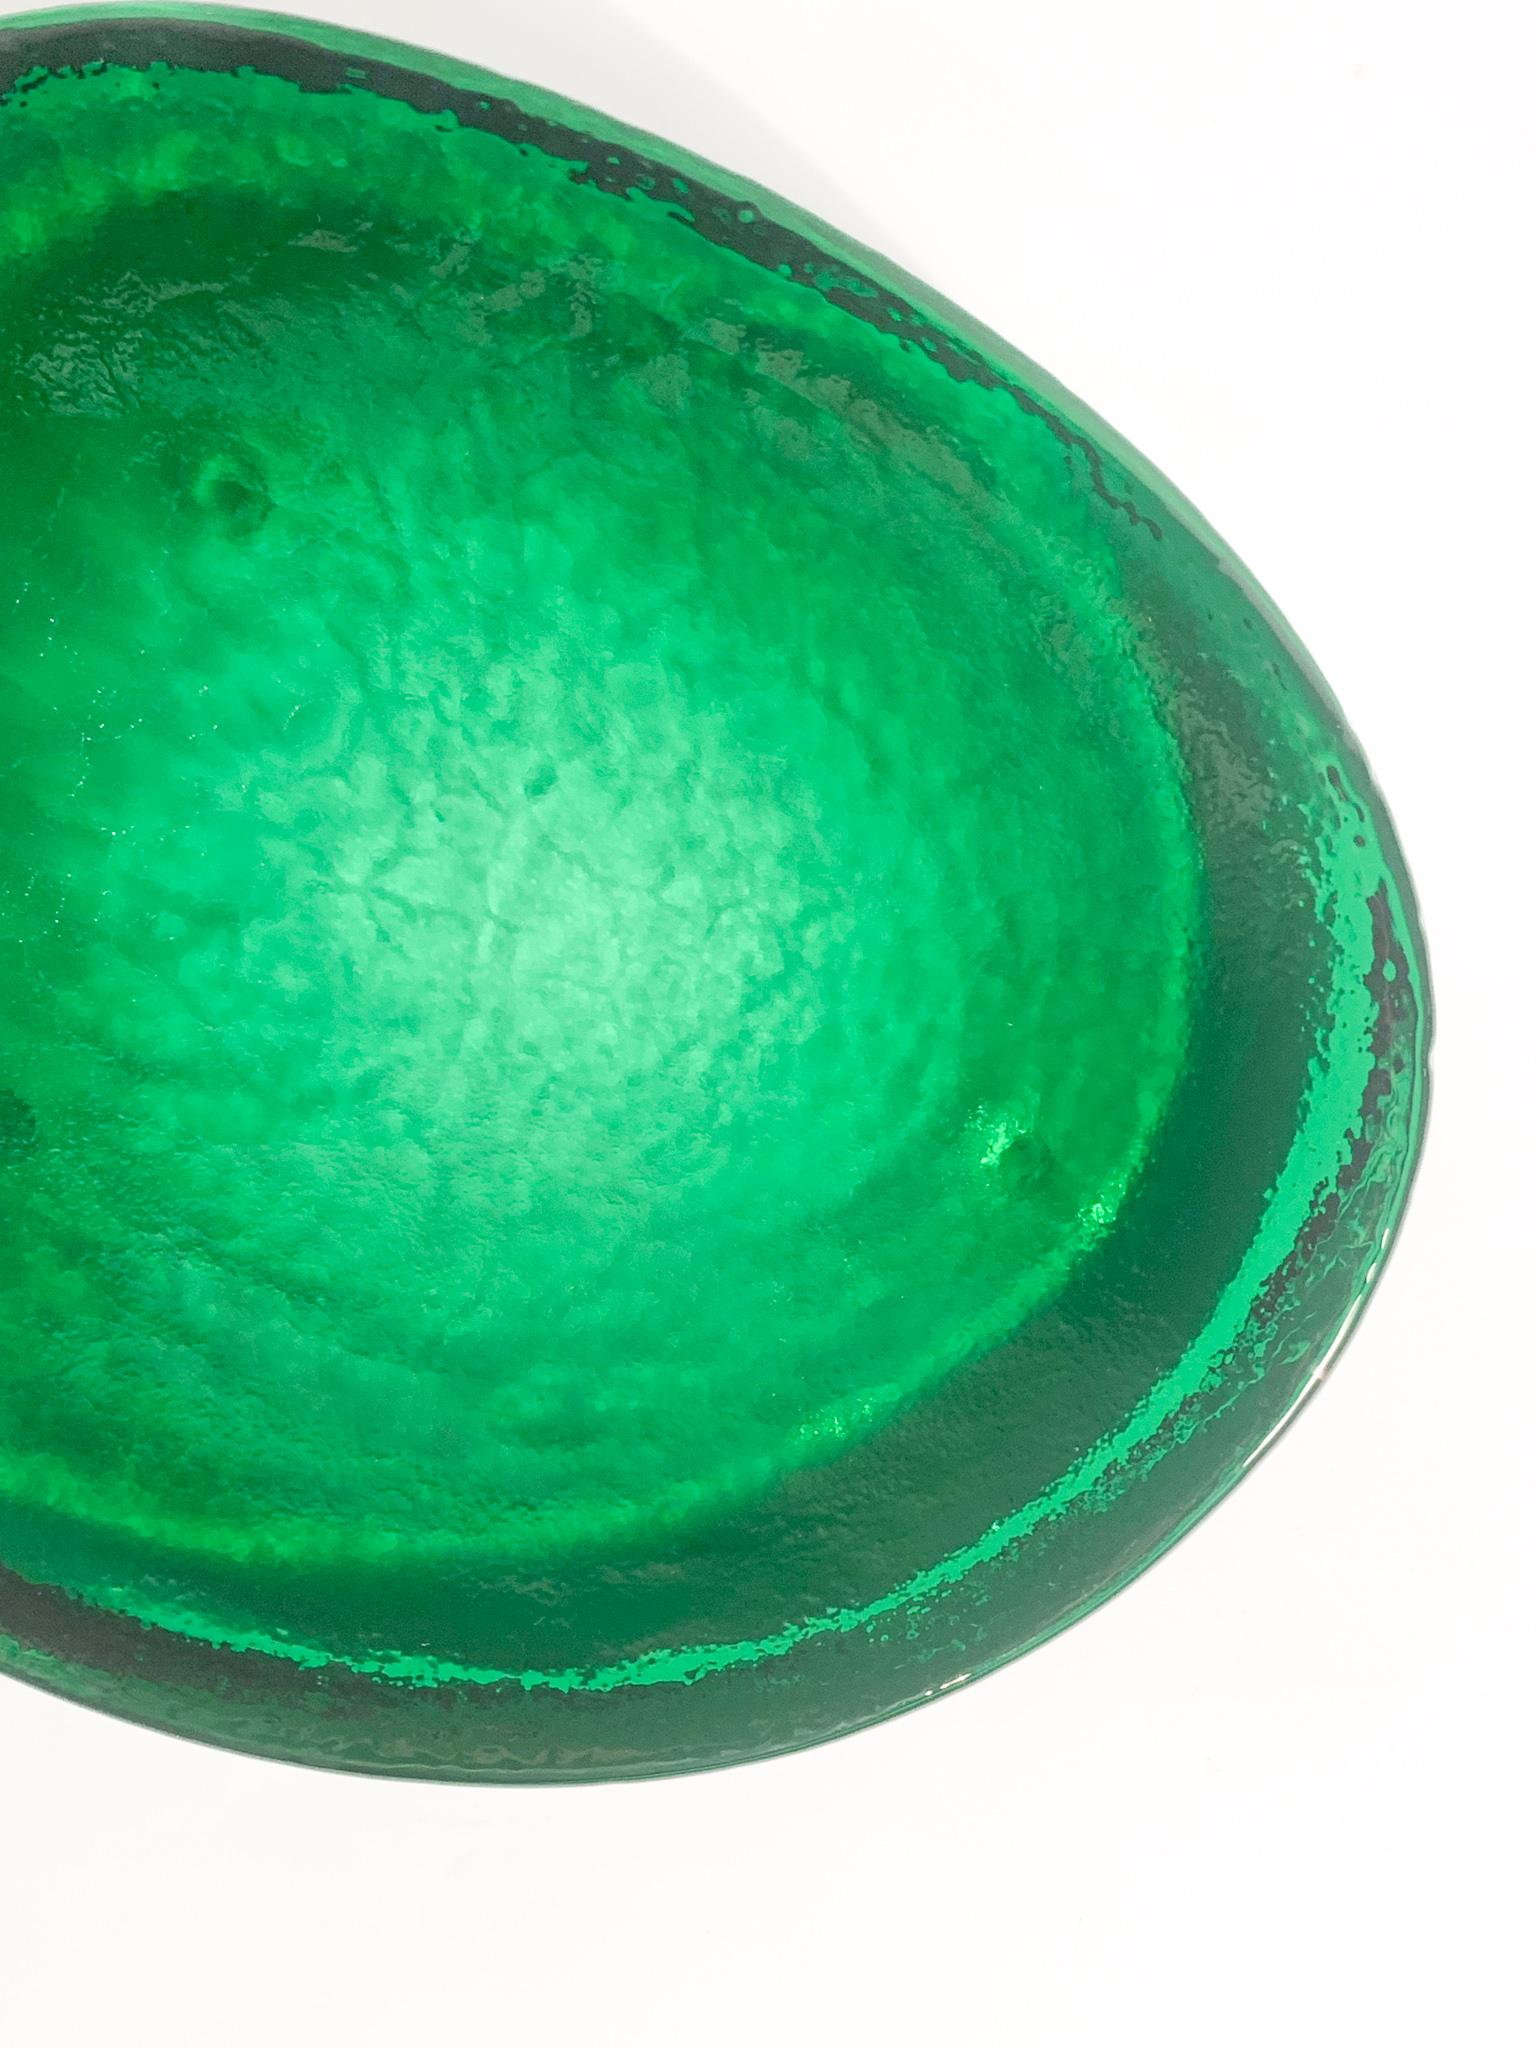 Mid-Century Modern Green Murano Glass Bowl by Nason from the 1980s